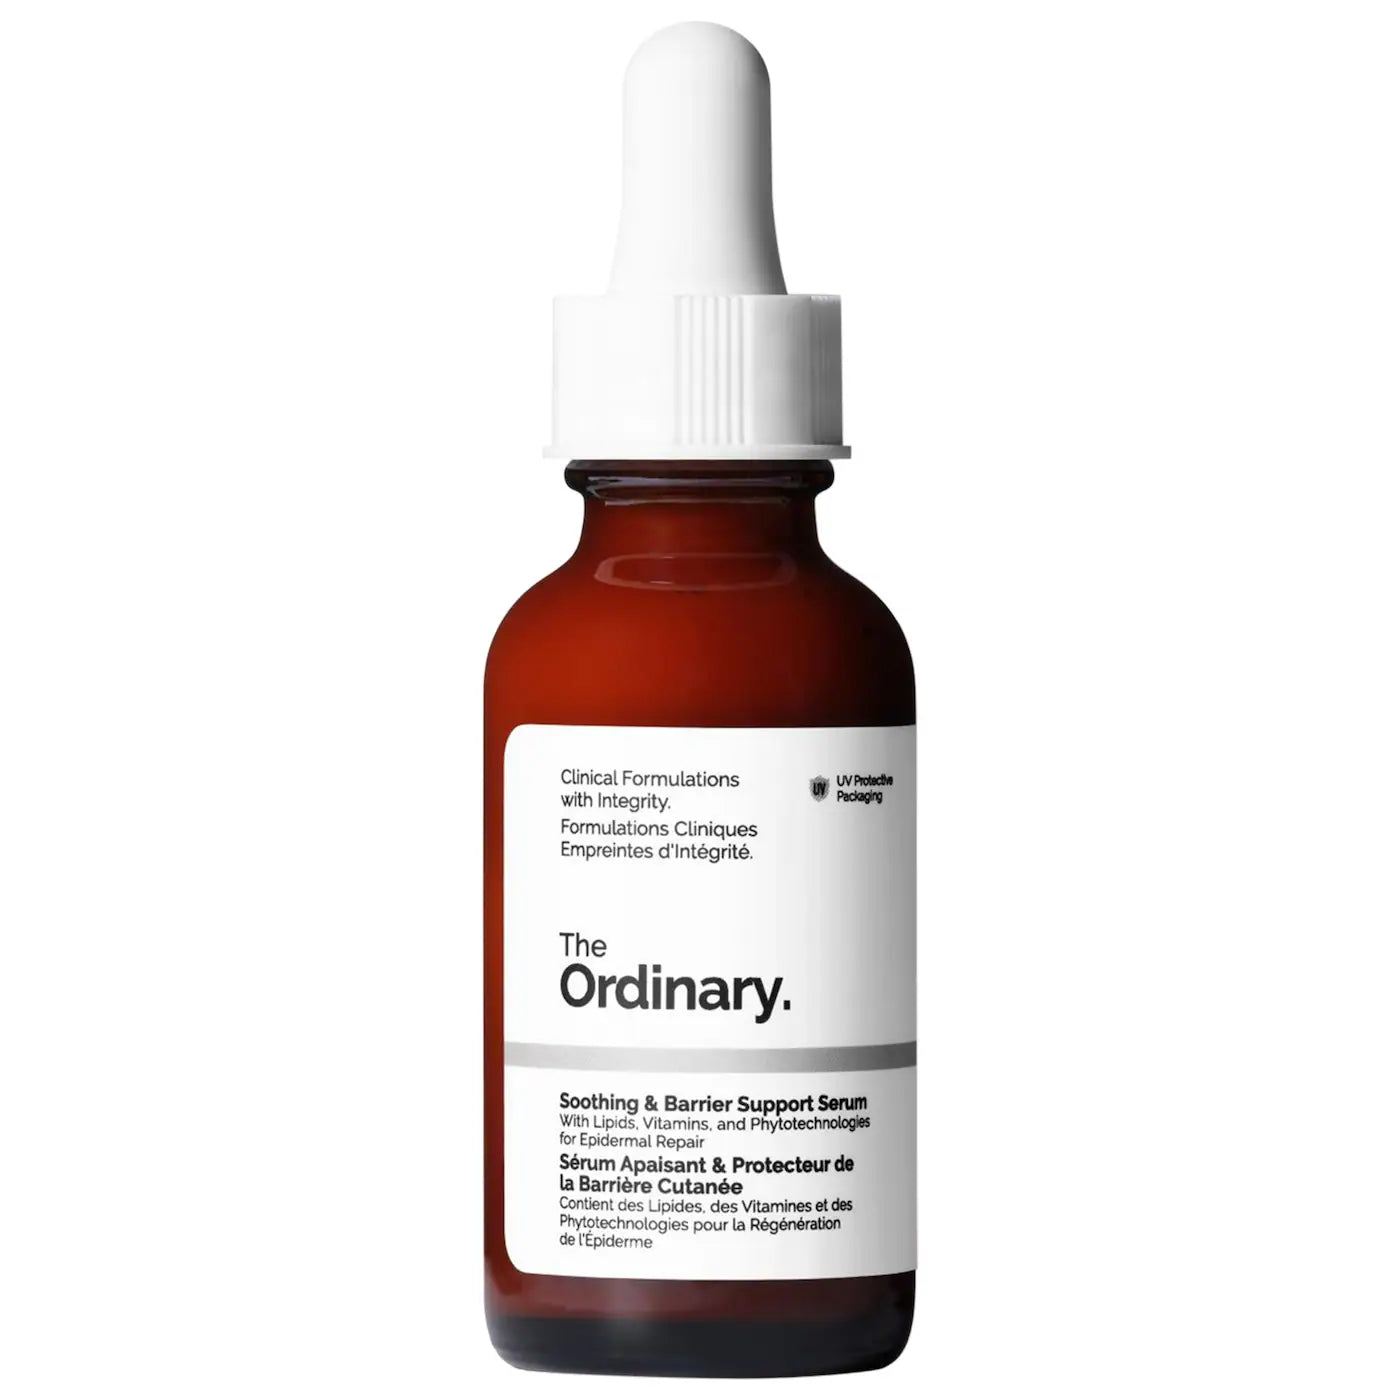 Soothing & Barrier Support Serum | THE ORDINARY